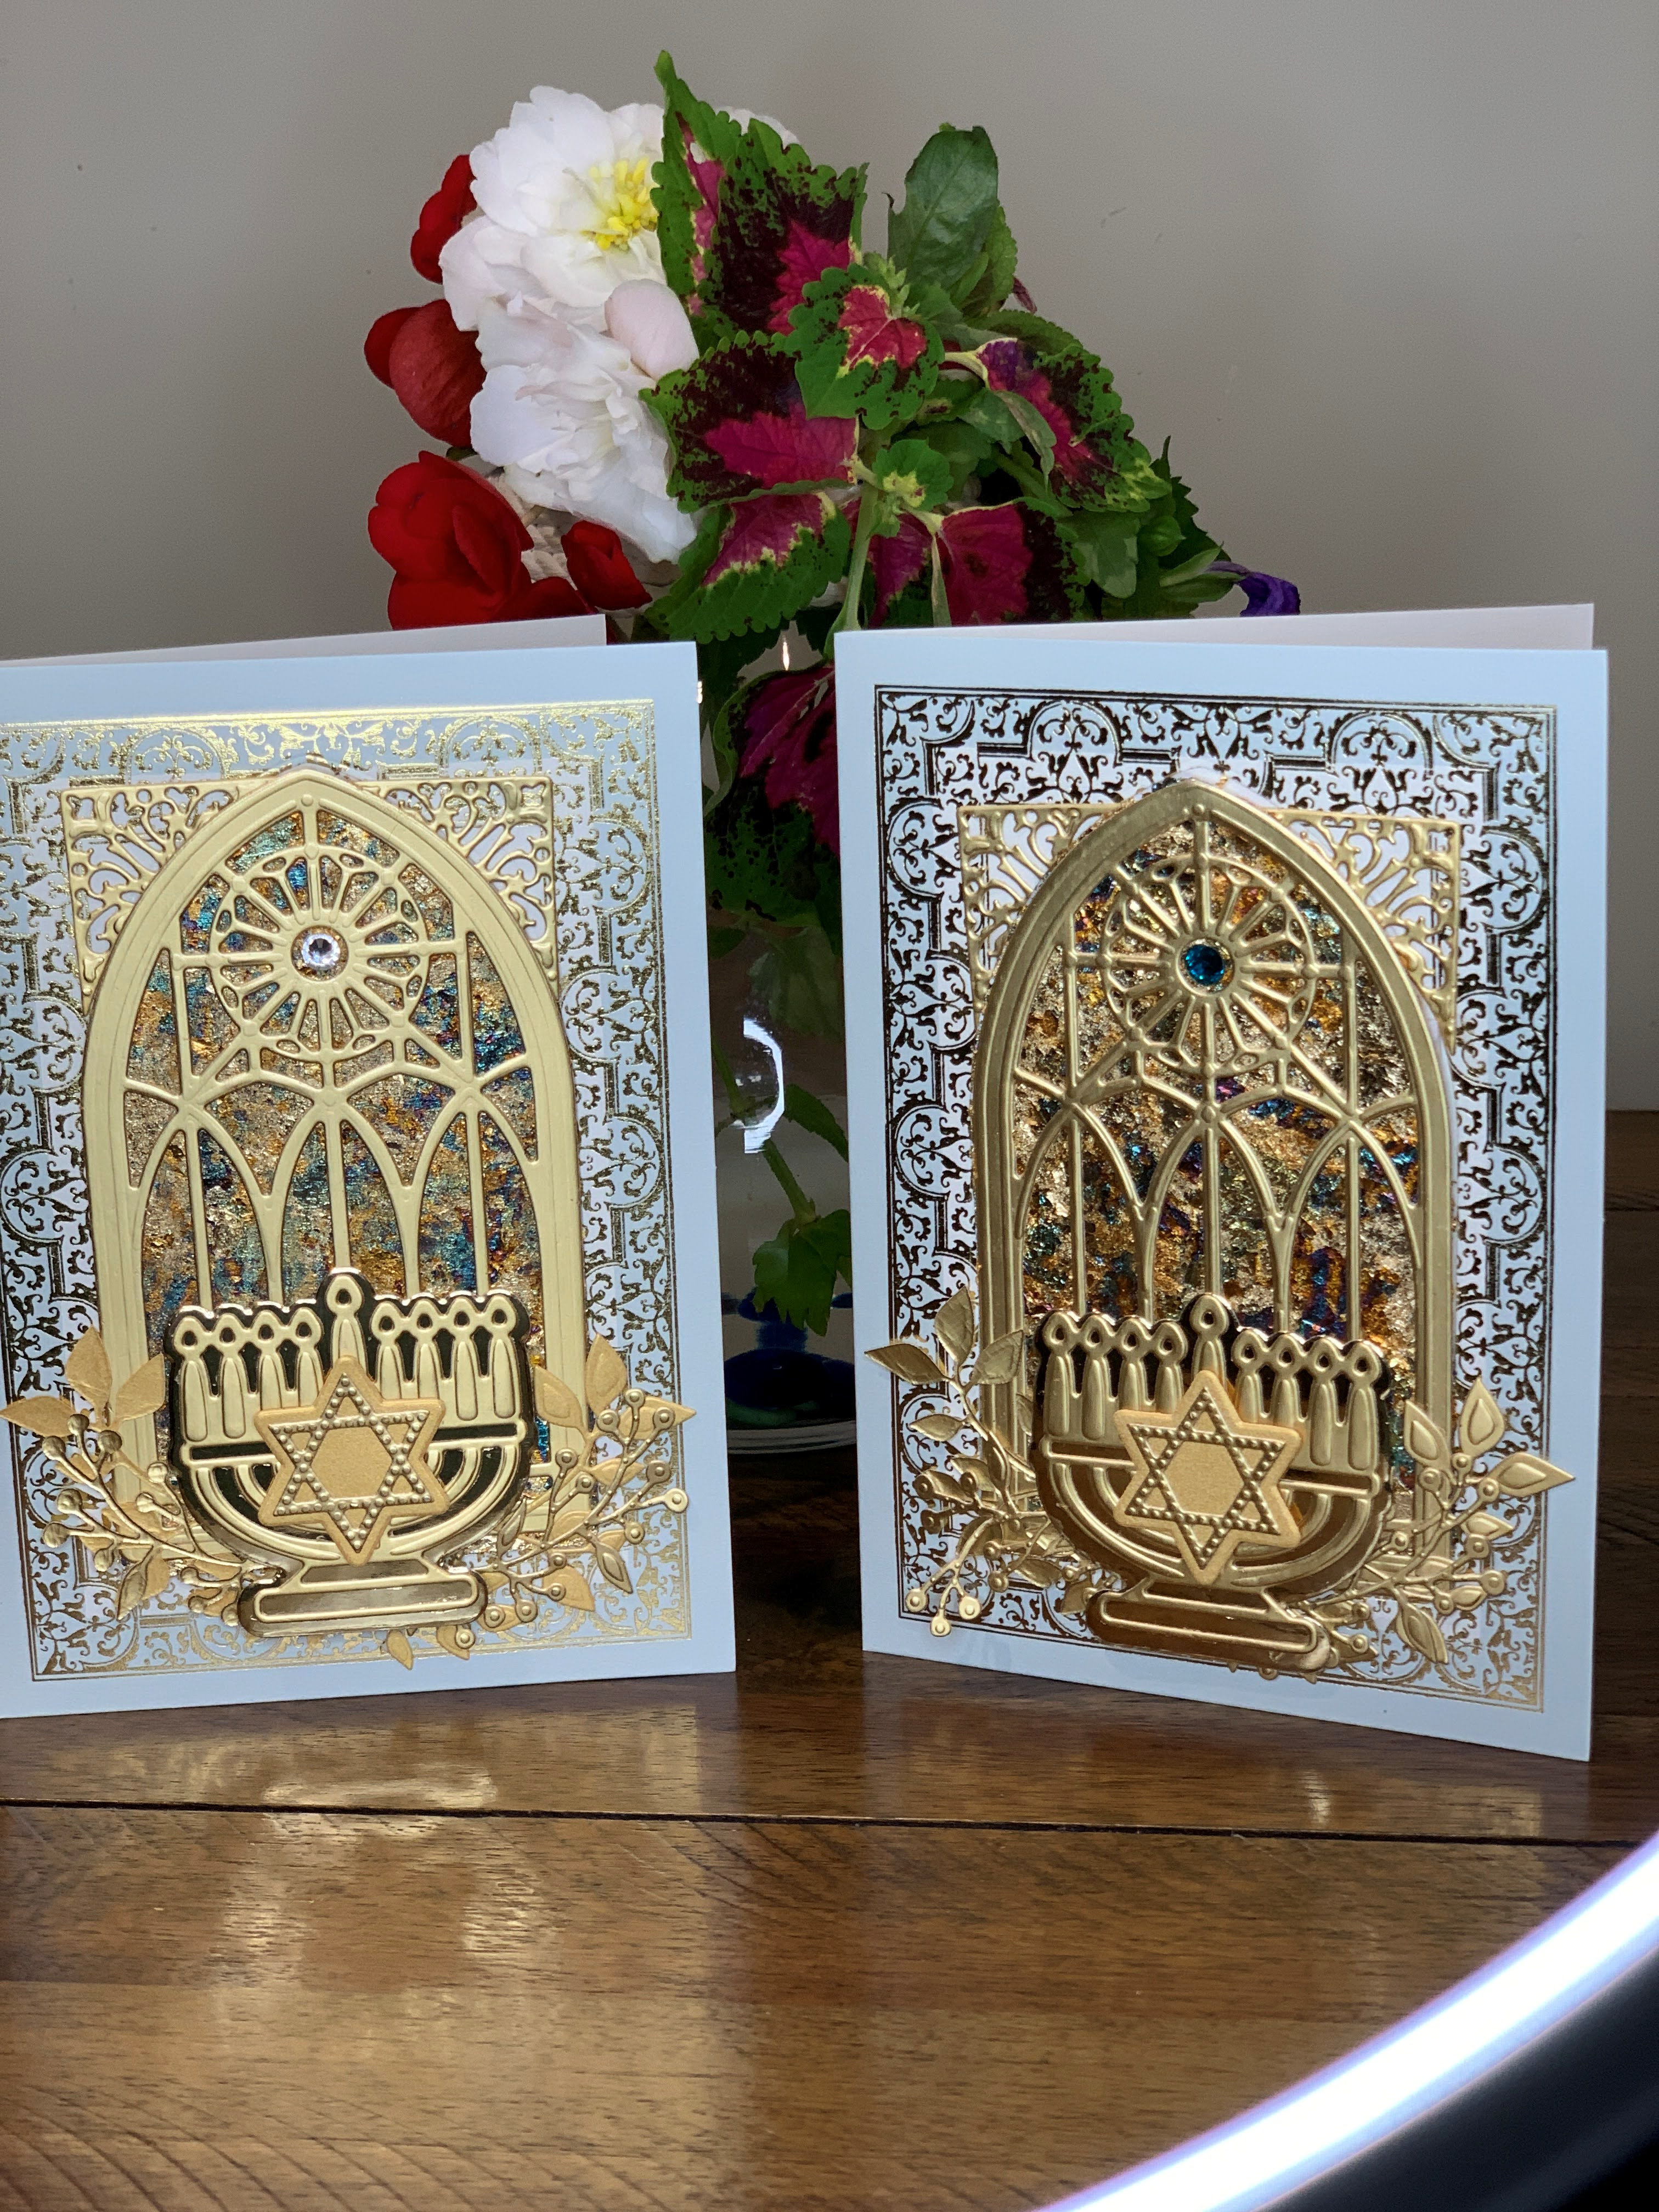 Two hanukkah cards on a table with flowers.